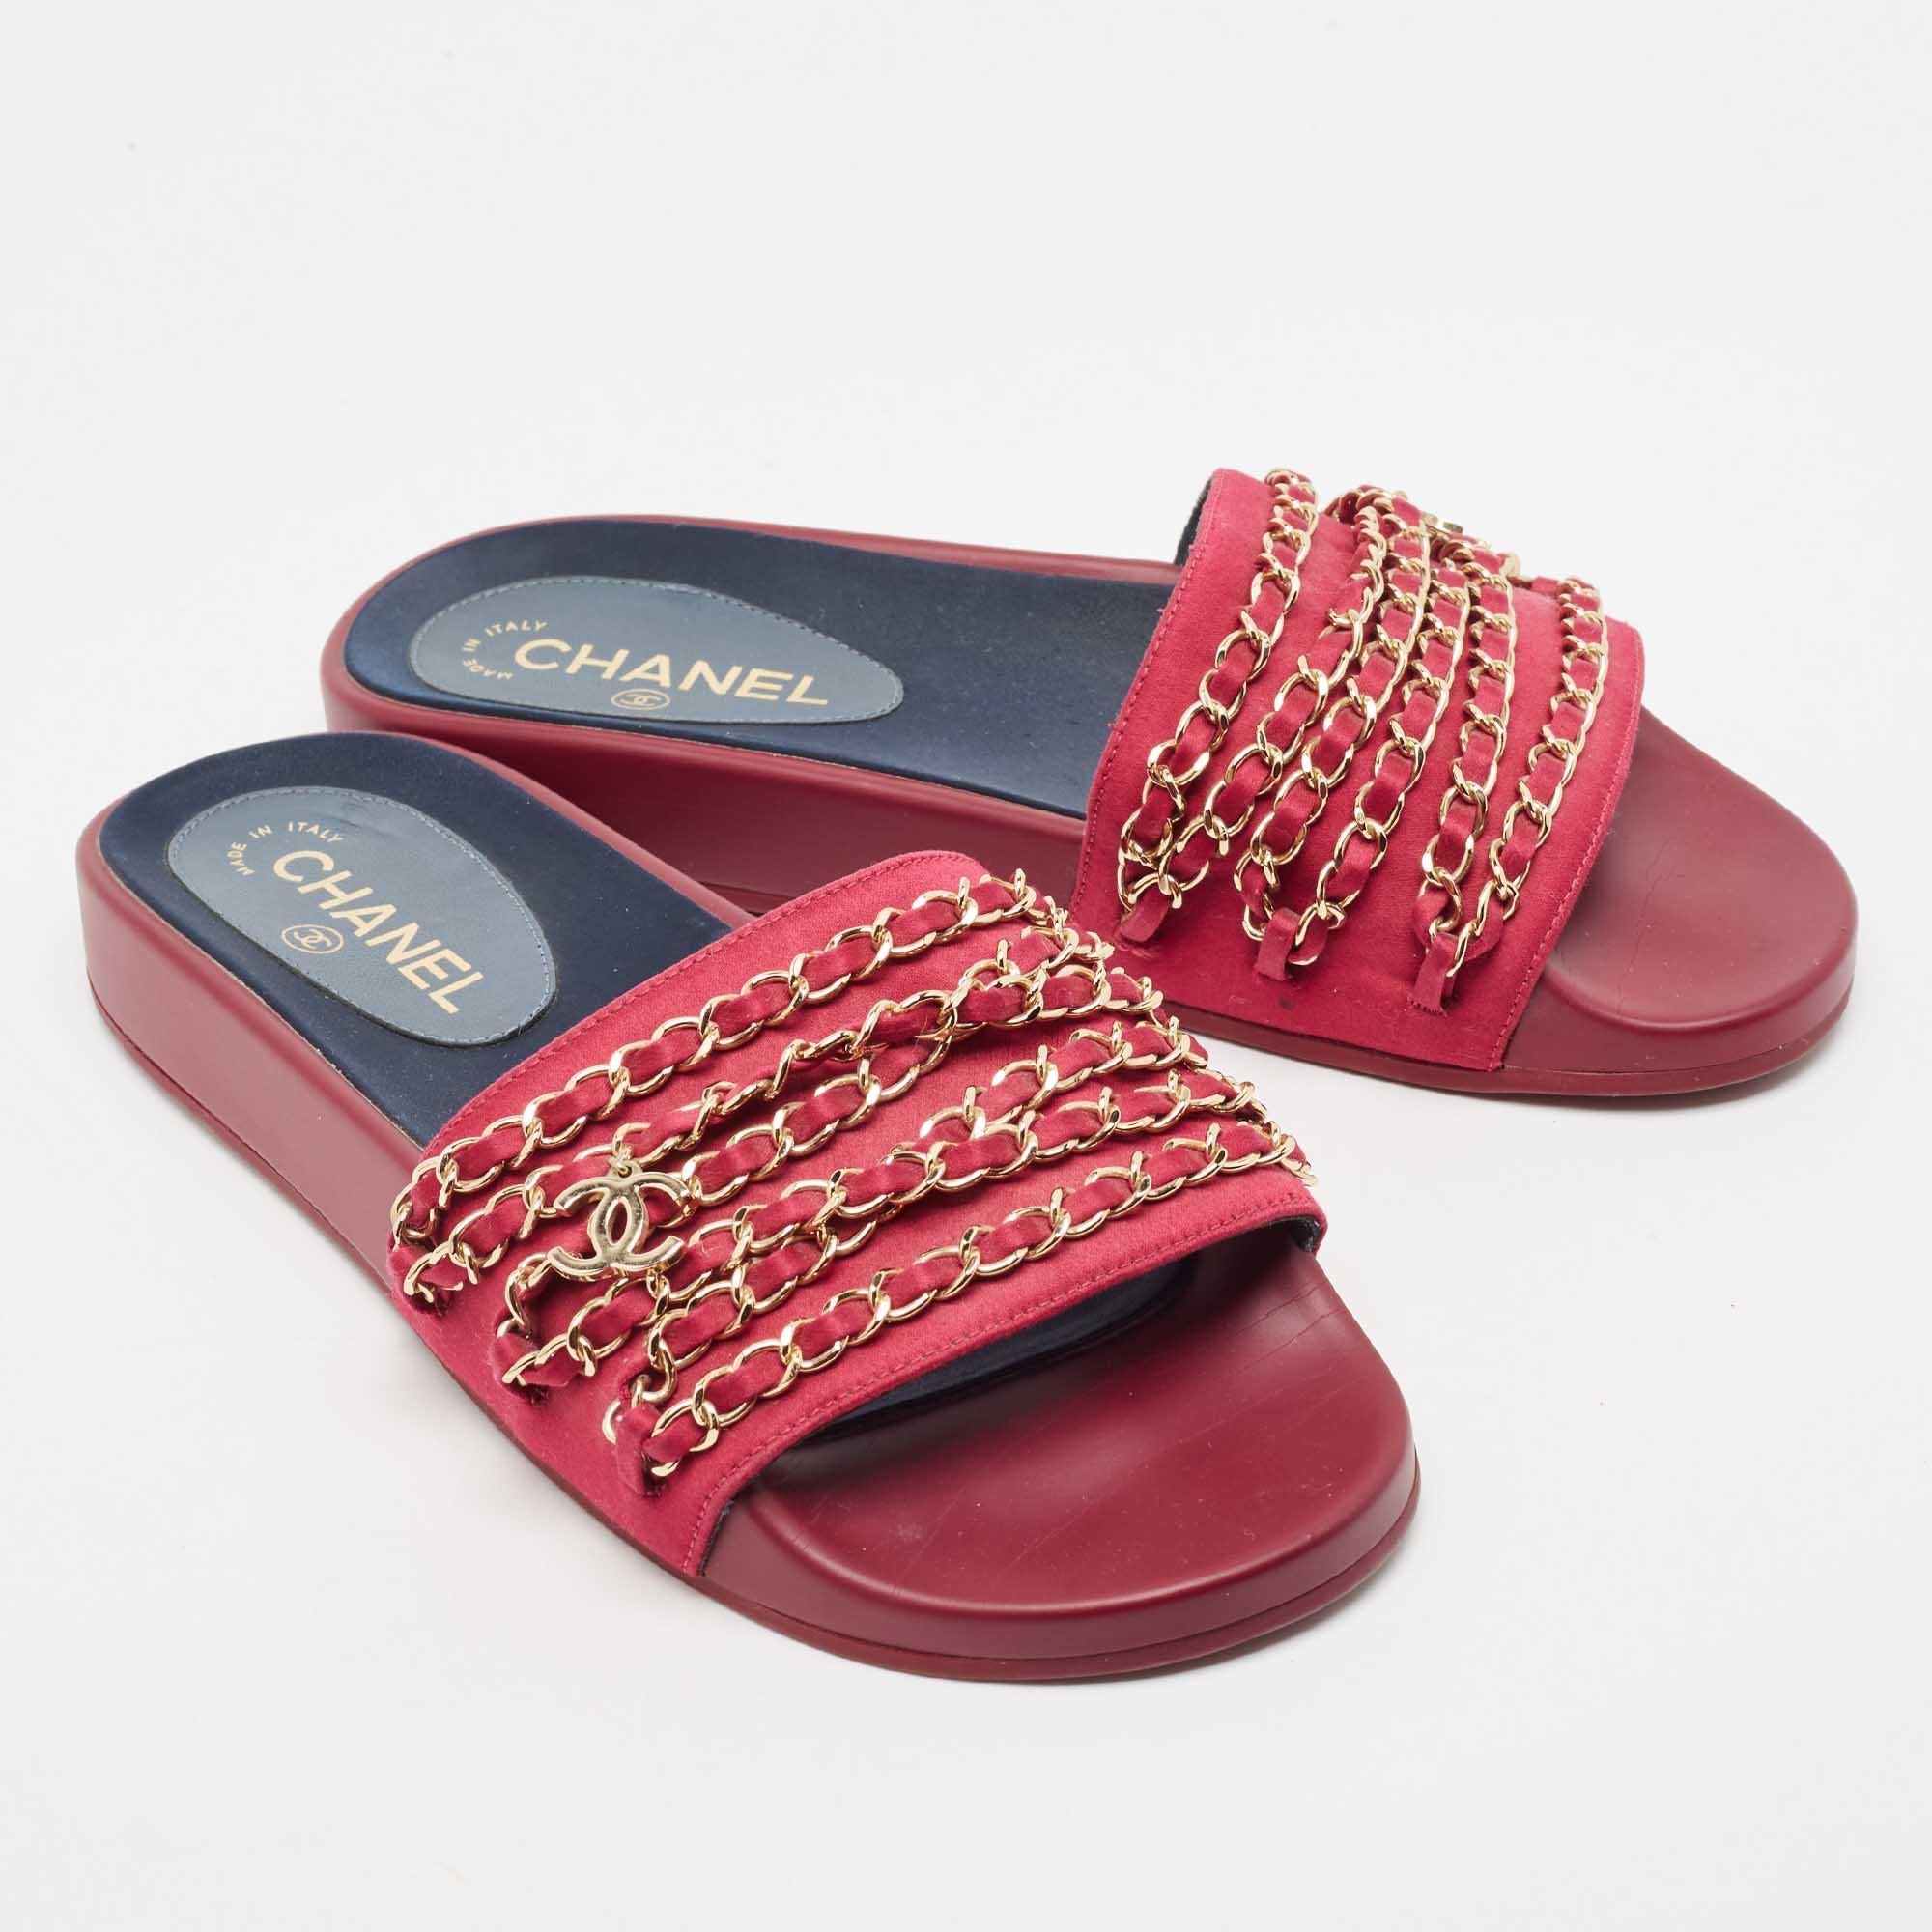 These embellished slides from Chanel have been designed to lift your style. They are crafted from satin and are designed to secure your feet fashionably.

